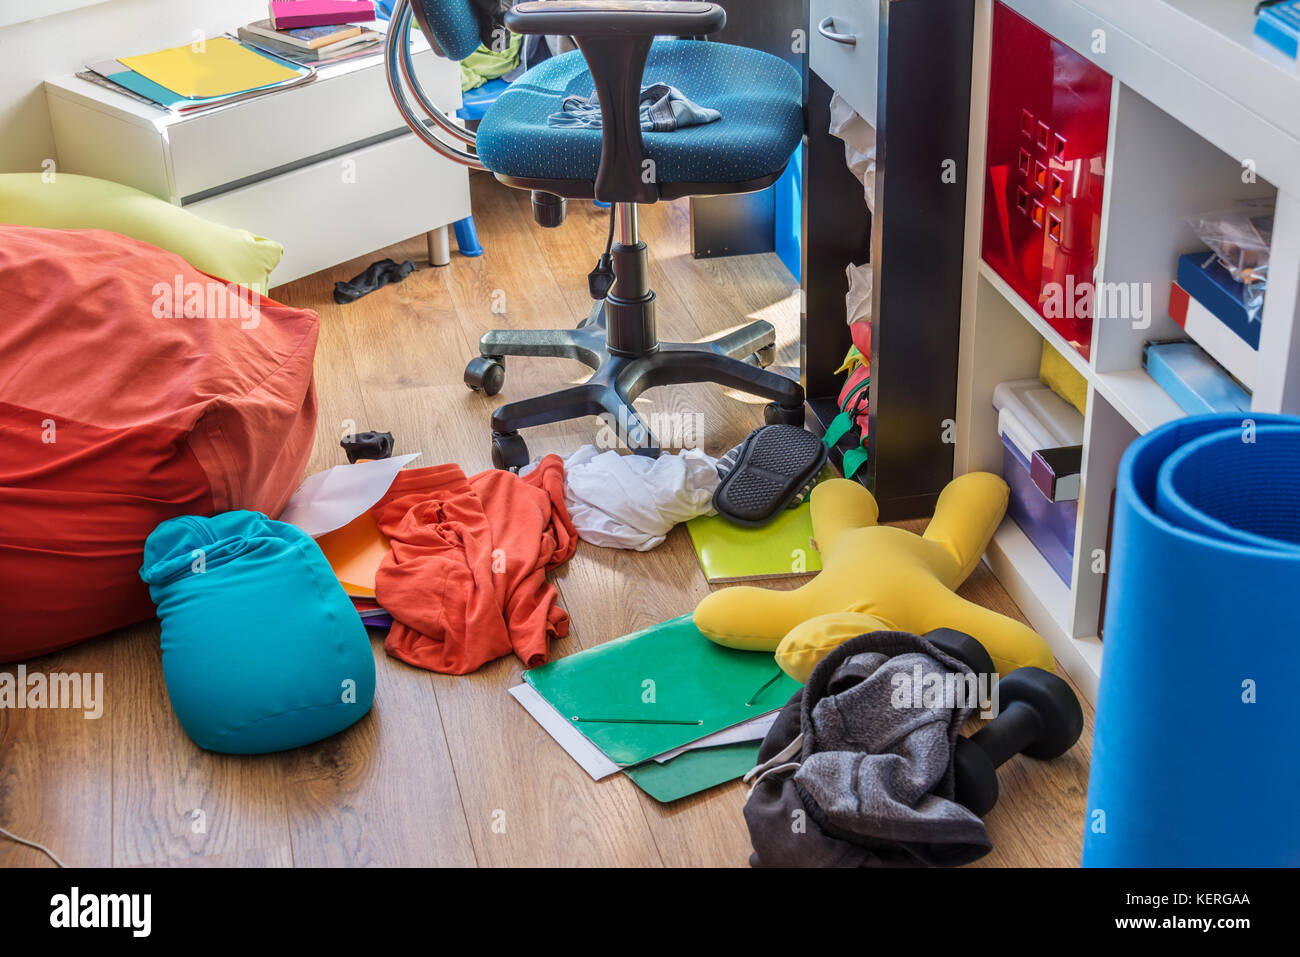 Boy messy bedroom with clothes and colorful pillows on the floor Stock Photo